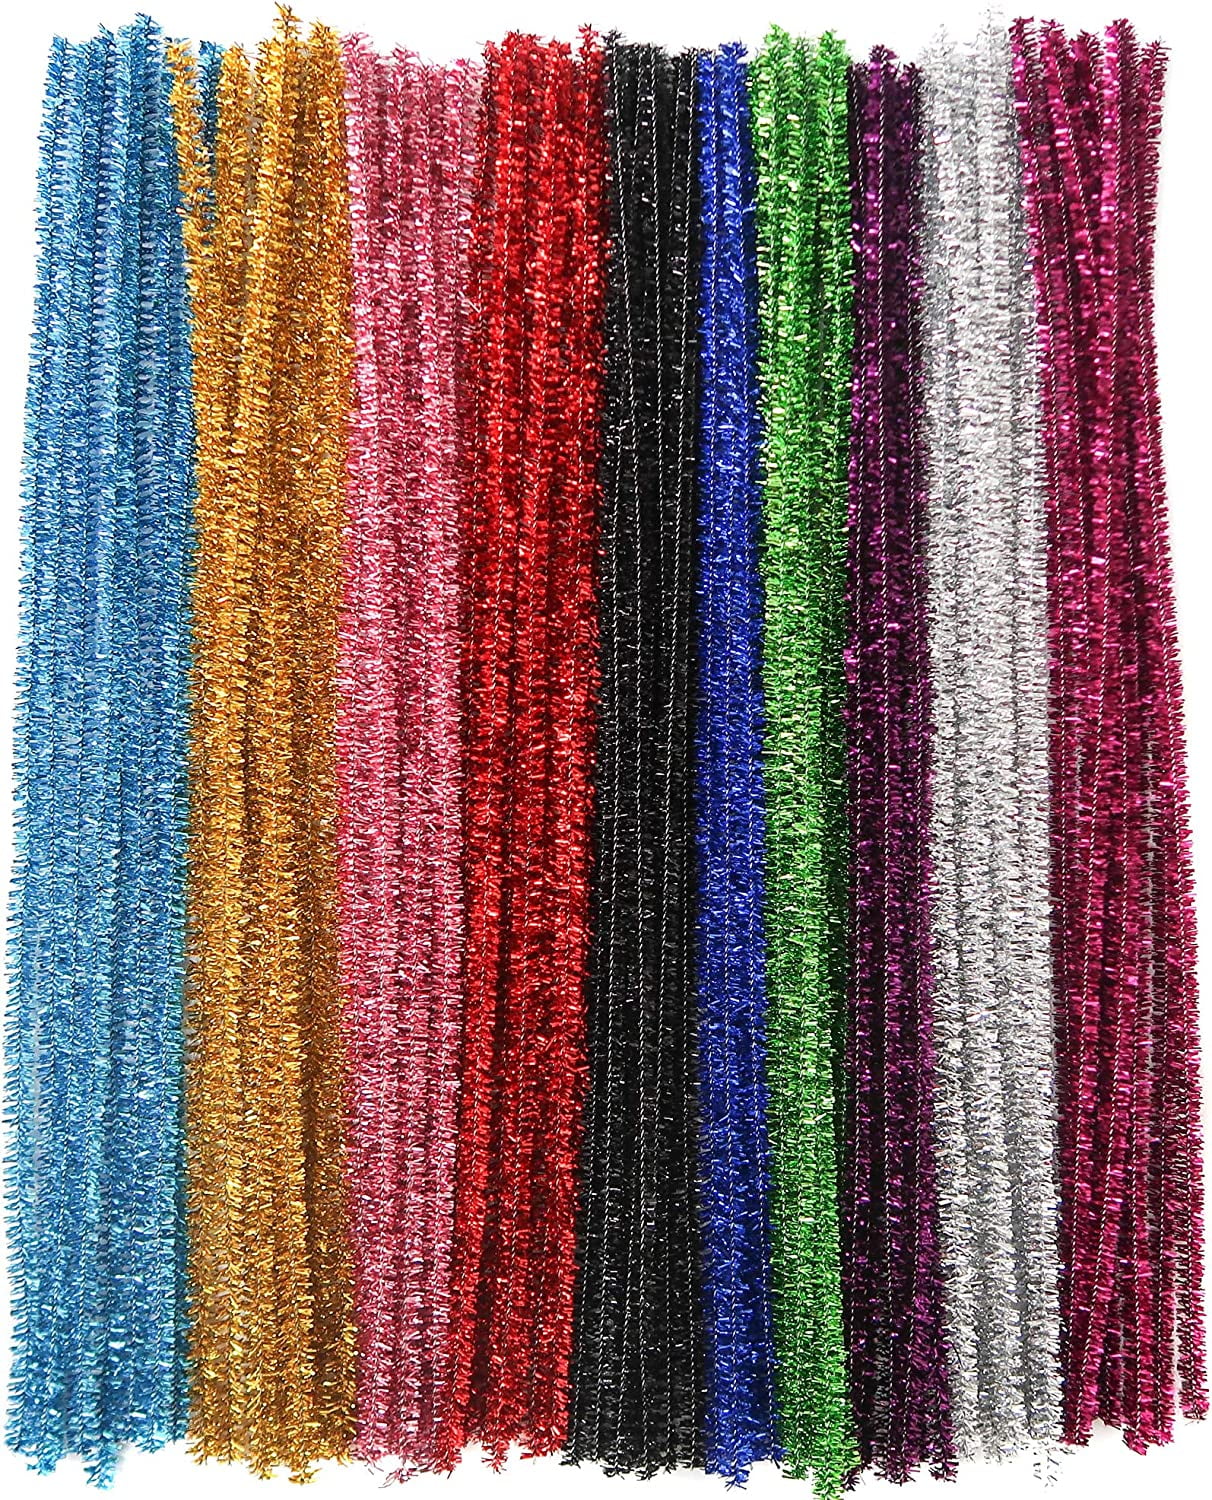  TOAOB 400pcs Glitter Pipe Cleaners 10 Colors Metallic Pipe  Cleaners Craft Supplies 6mm x 12 Inch Chenille Stems Pipe Cleaners for Art  DIY Crafts Decorations : Arts, Crafts & Sewing